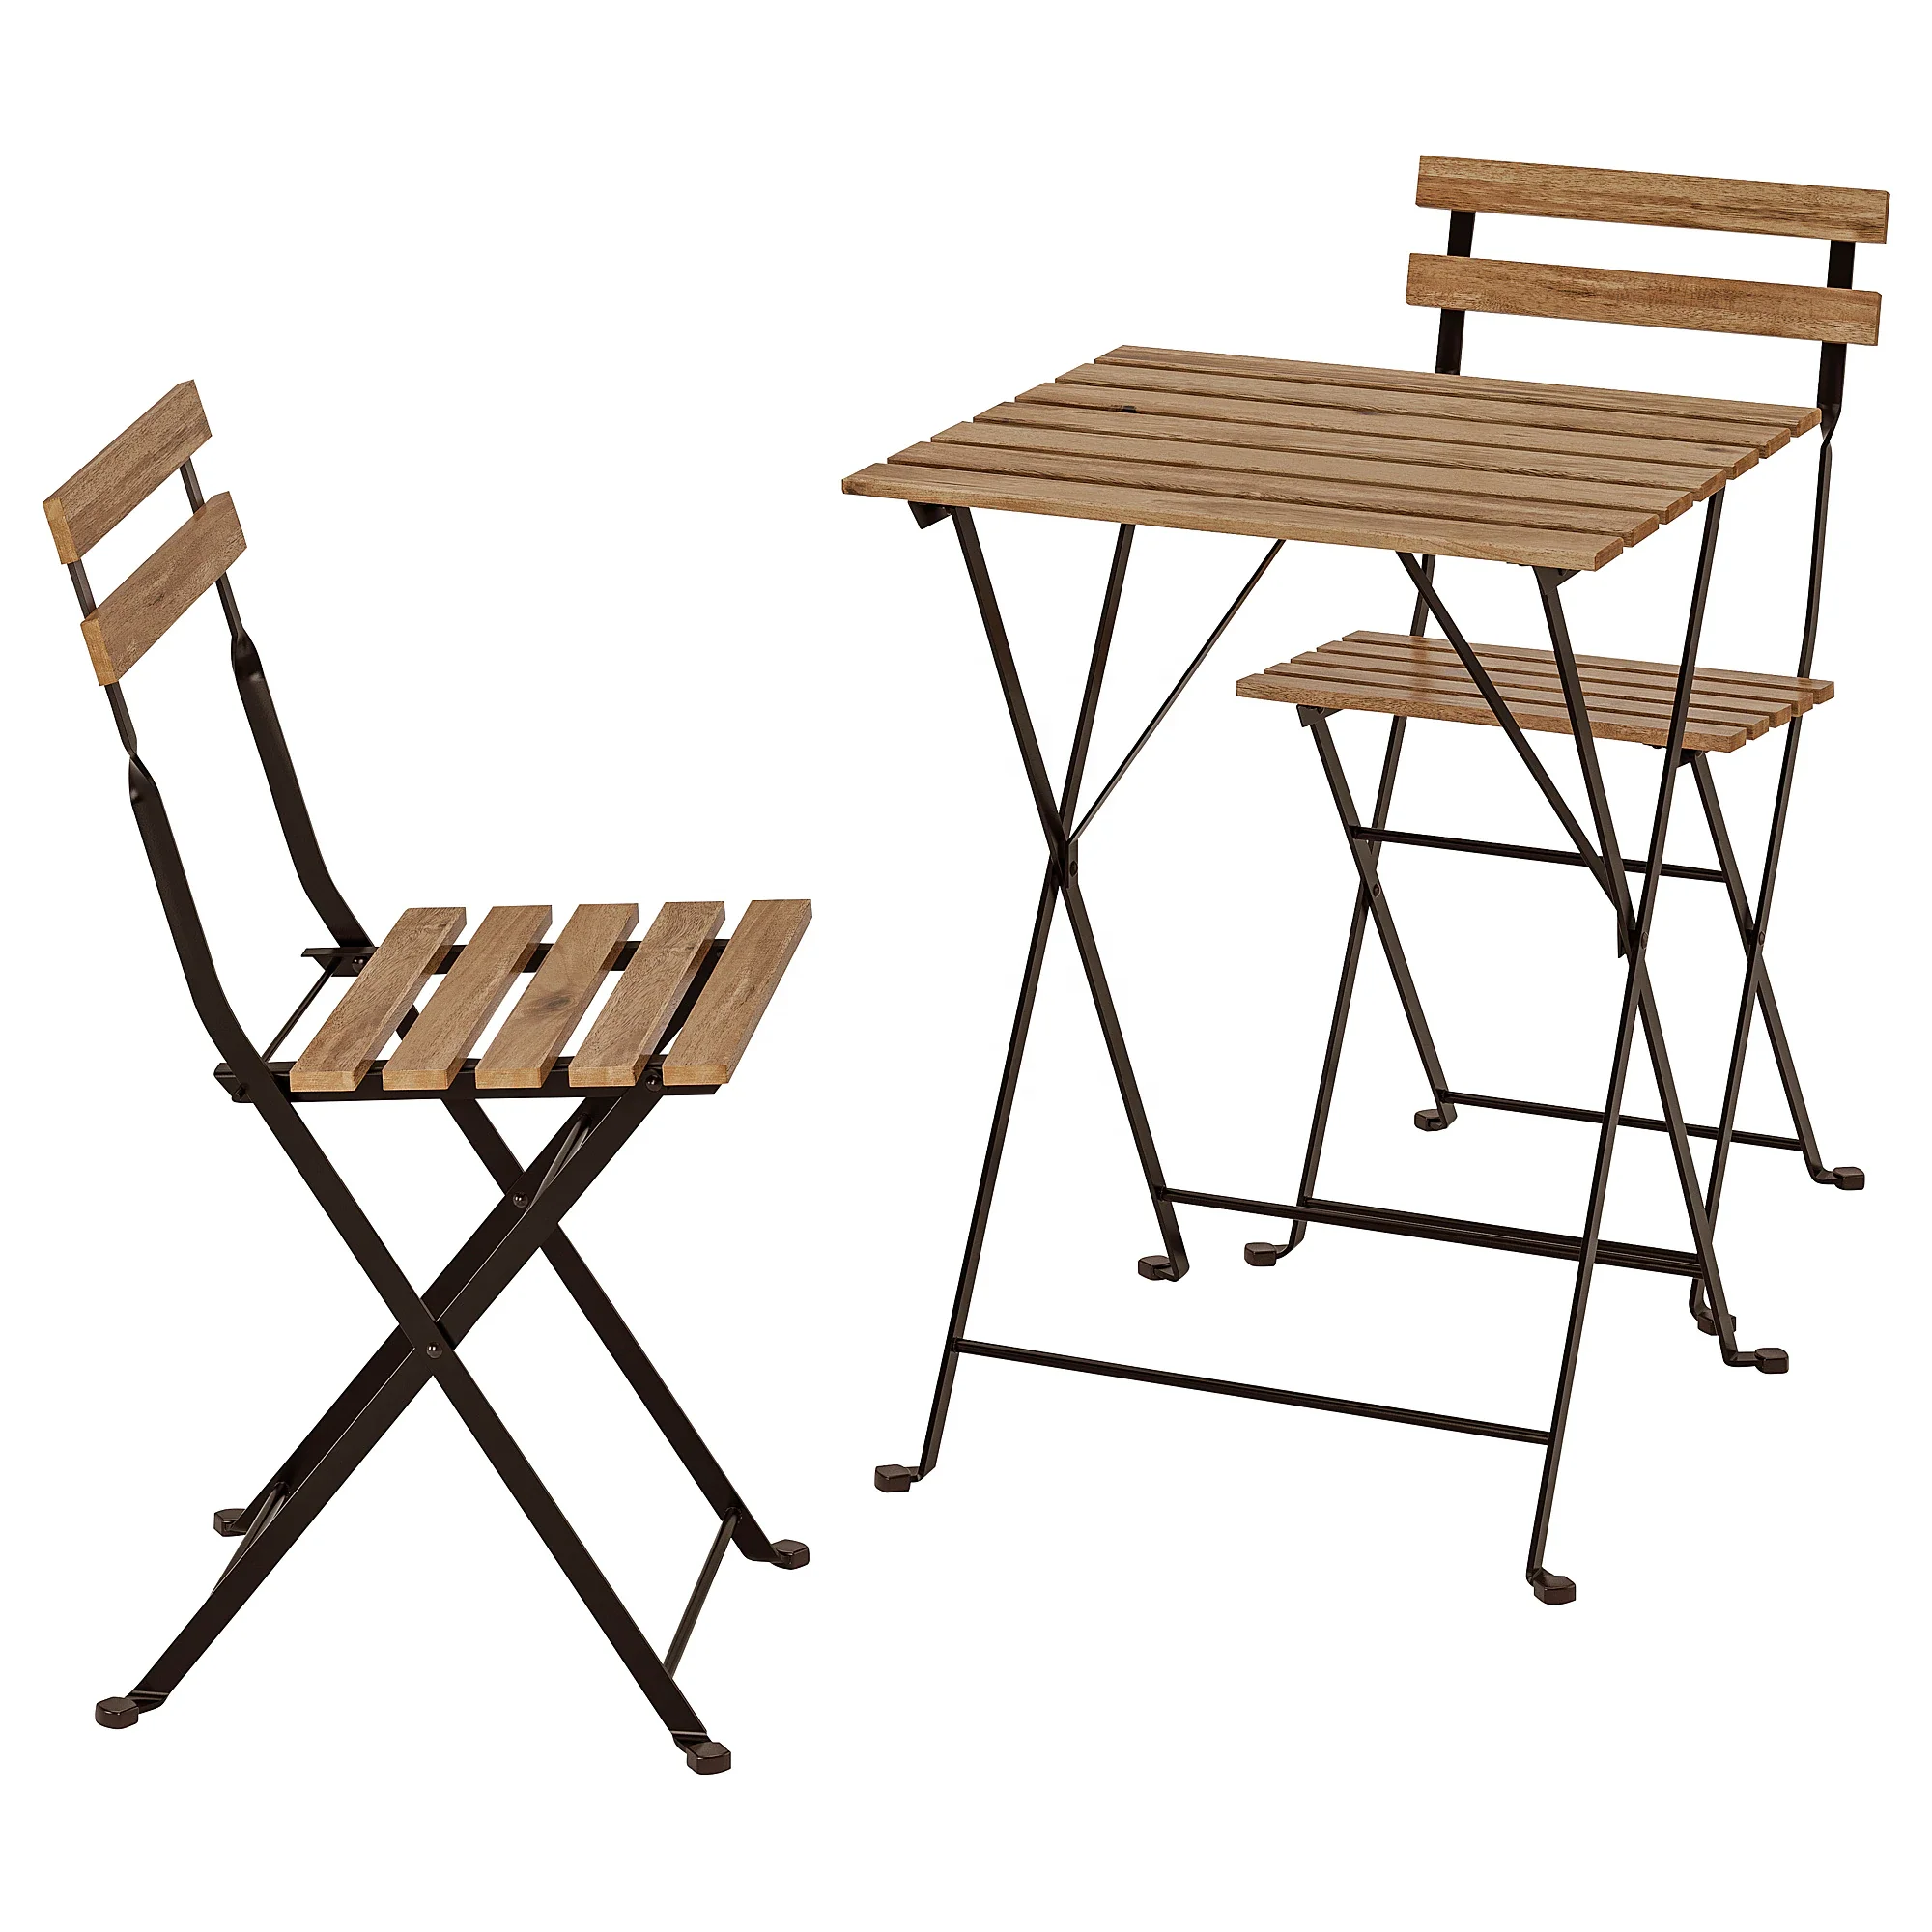 
Grand patio Steel and wood Patio Bistro Set Folding Outdoor Patio Furniture  (62379245435)